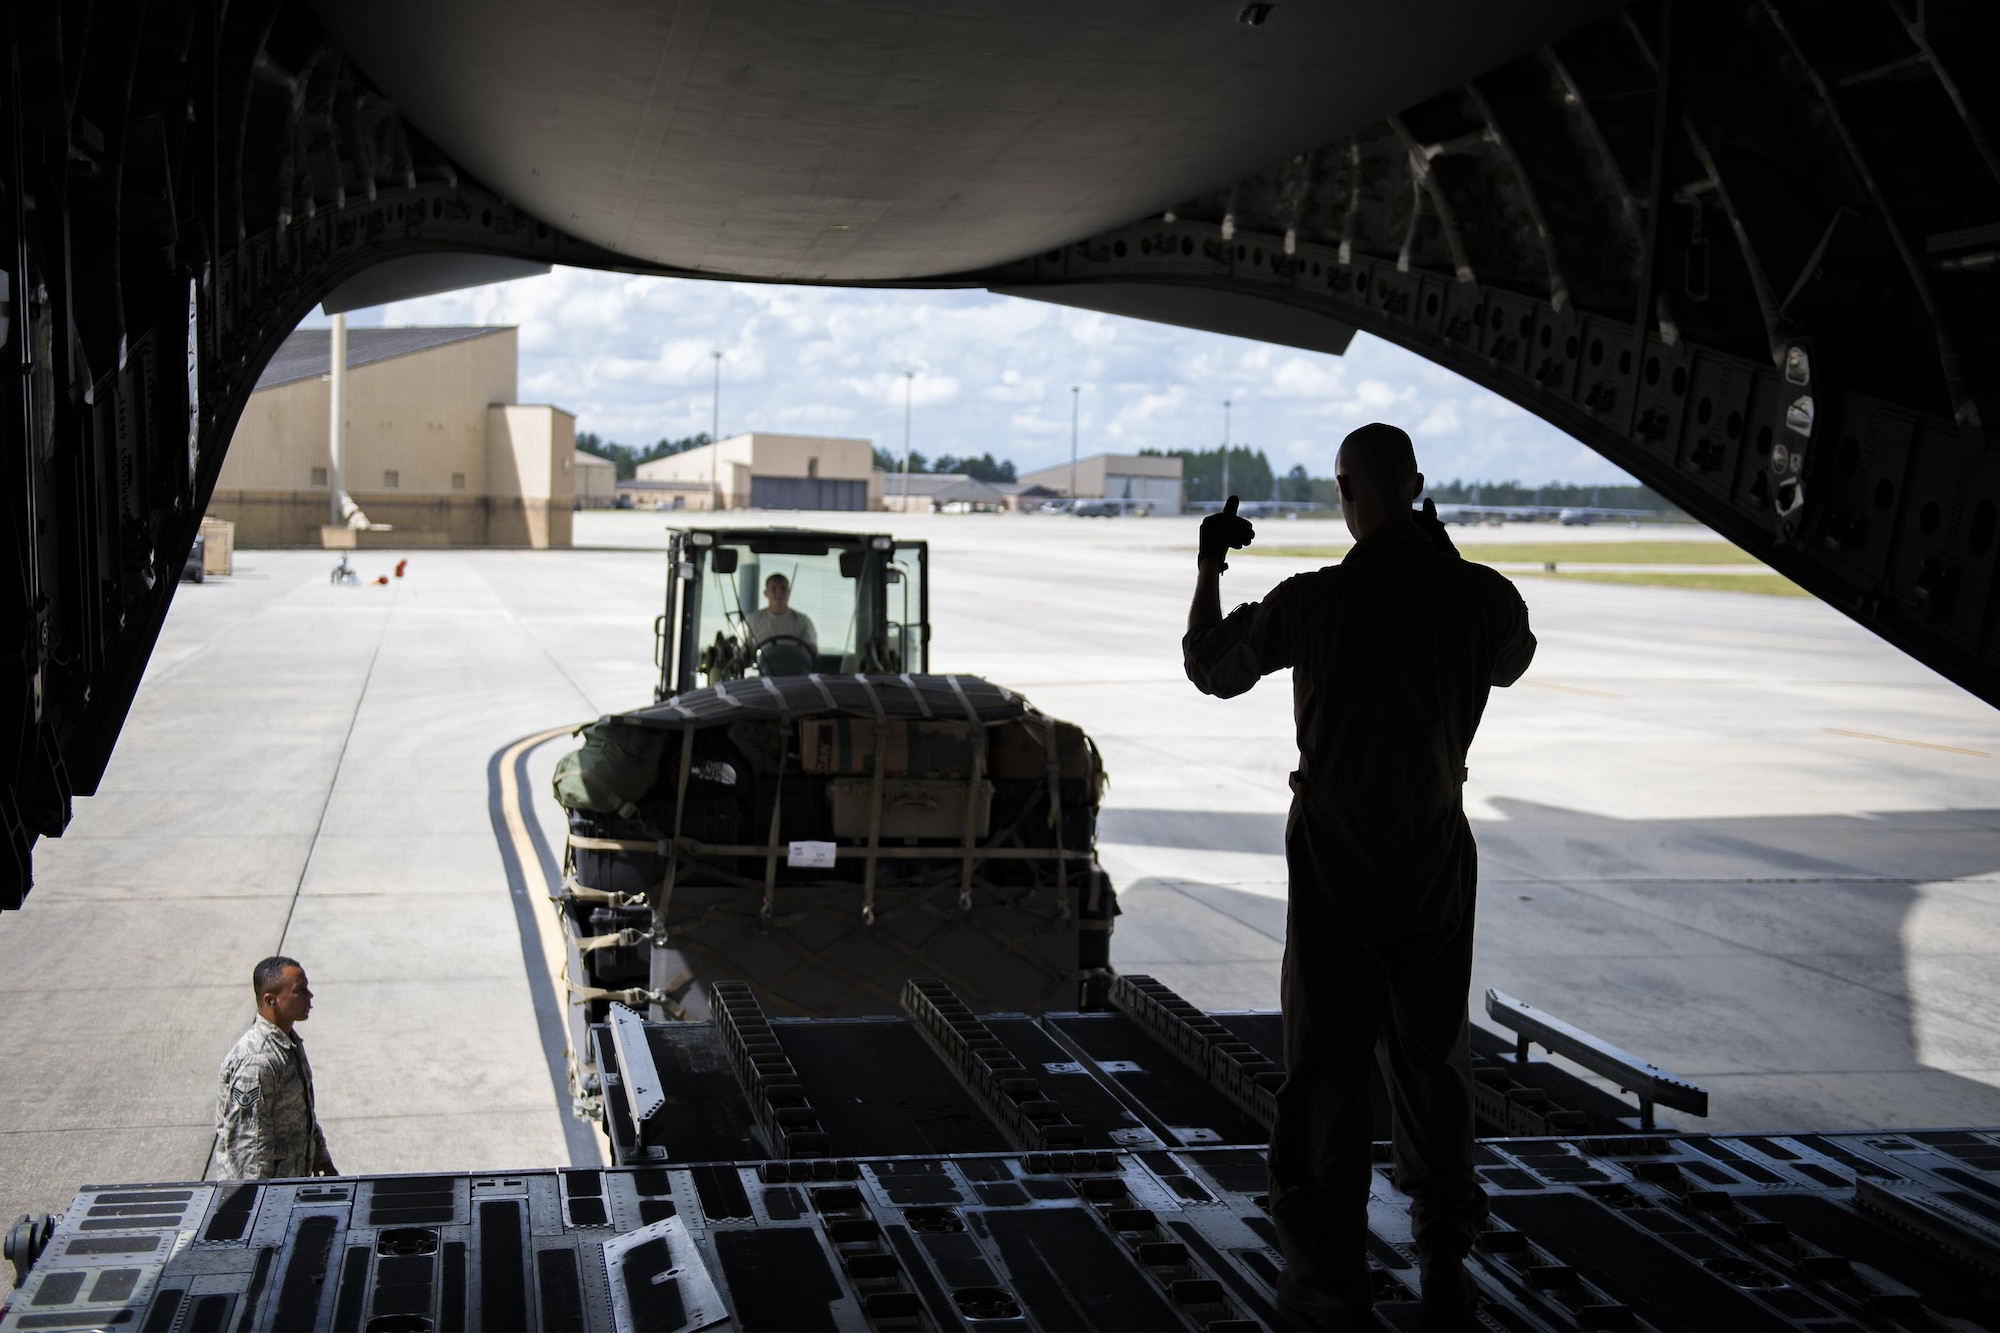 U.S. Air Force Staff Sgt. Ryan Nichols, 7th Airlift Squadron loadmaster, assists Staff Sgt. Brennon Scott, 23d Logistics Readiness Squadron air terminal operations supervisor, in loading baggage and weapons onto a C-17 Globemaster III, Sept. 26, 2016, at Moody Air Force Base, Ga. As the loadmaster, Nichols supervised everything entering the aircraft, prepared seating for Airmen and ensured everything on board was secure for flight. (U.S. Air Force photo by Airman 1st Class Daniel Snider)